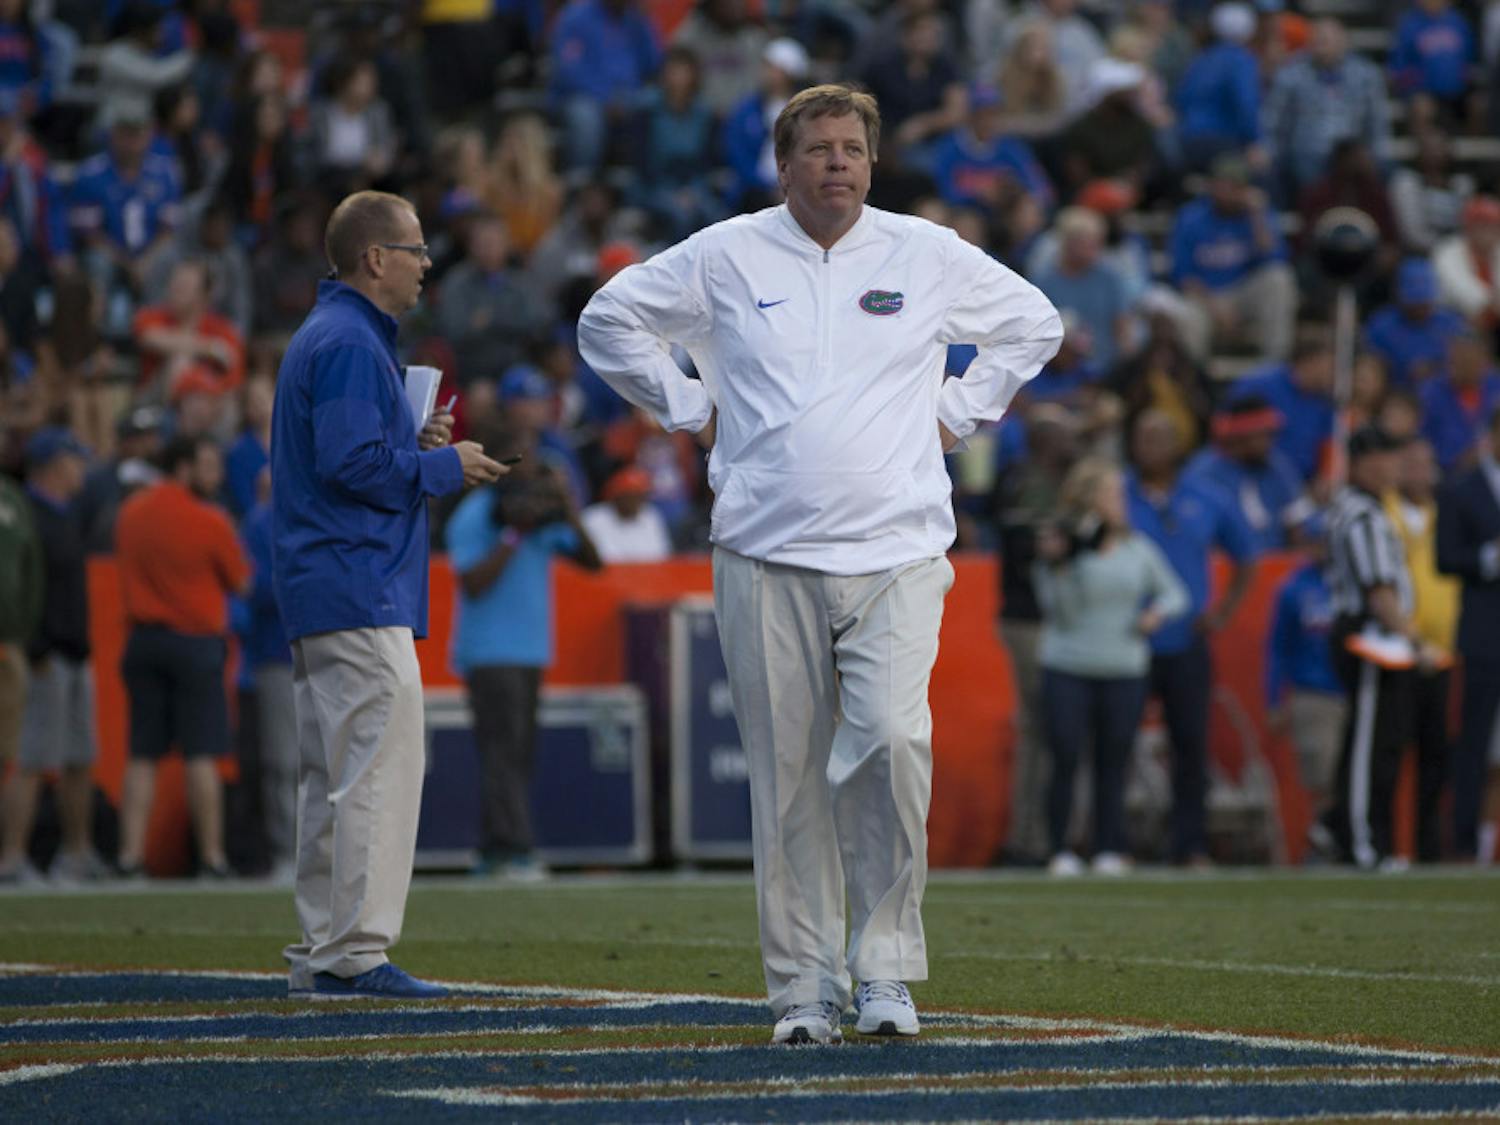 UF coach Jim McElwain watches on during UF's Orange and Blue Debut on April 7, 2017, at Ben Hill Griffin Stadium.